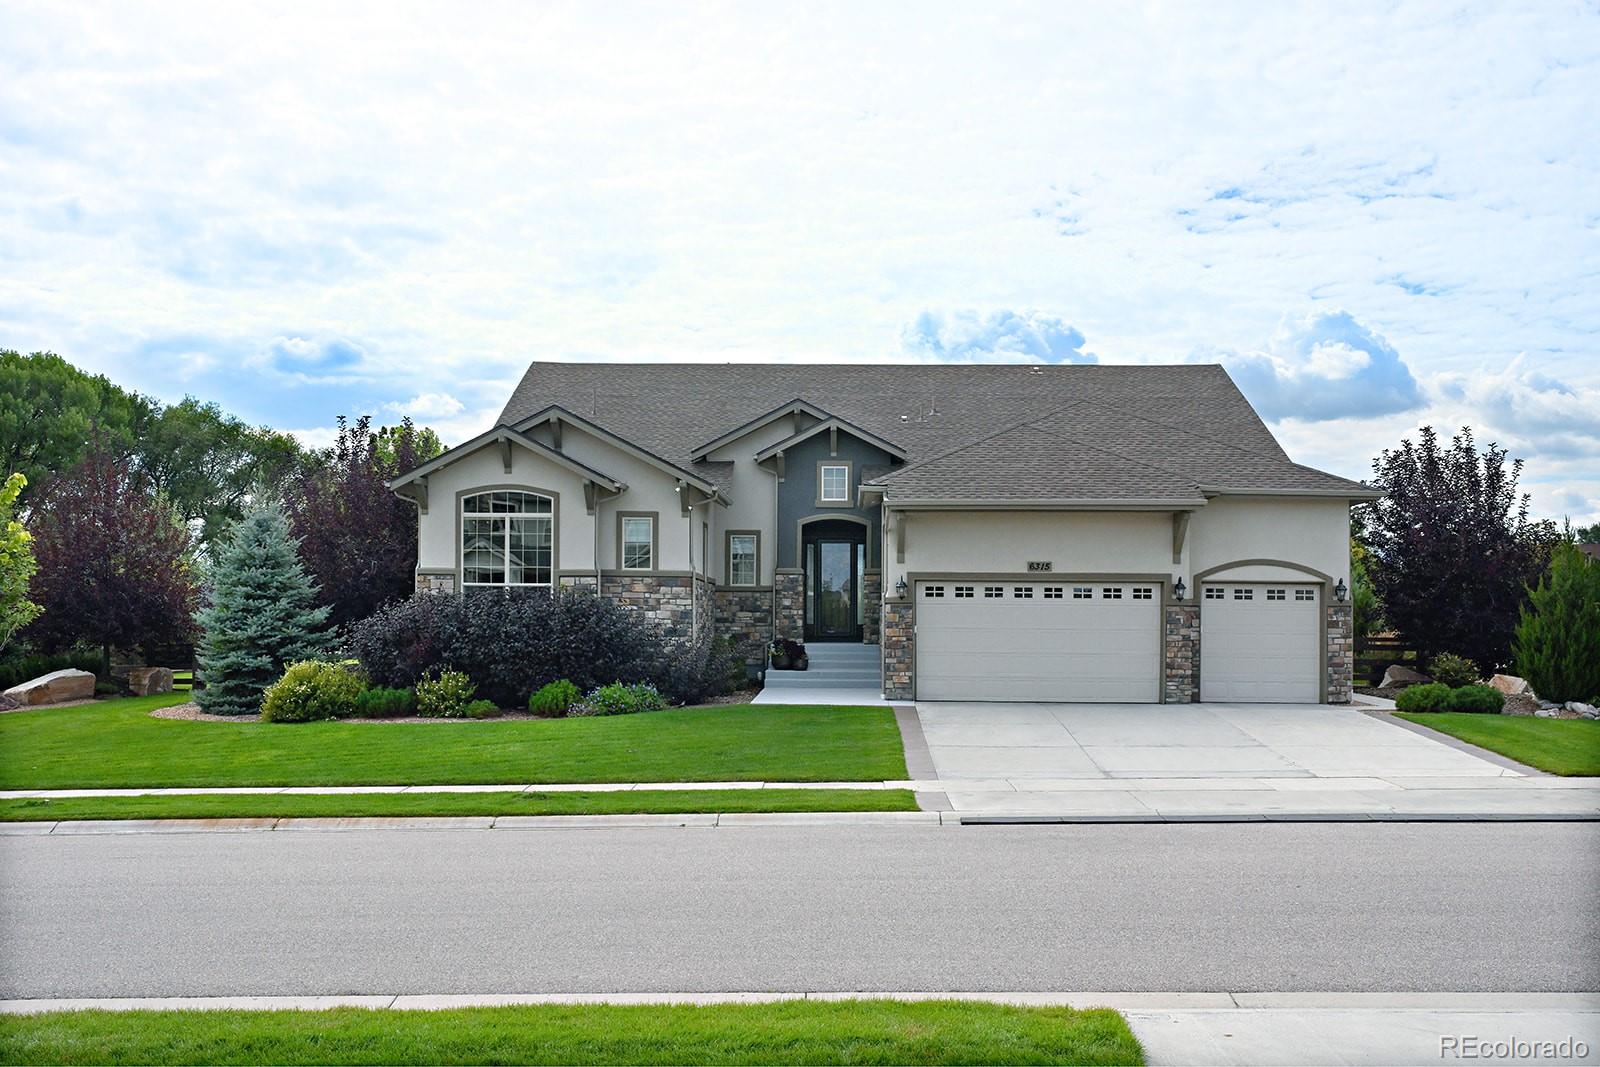 6315  Fall Harvest Way, fort collins MLS: 4886741 Beds: 4 Baths: 5 Price: $1,995,000